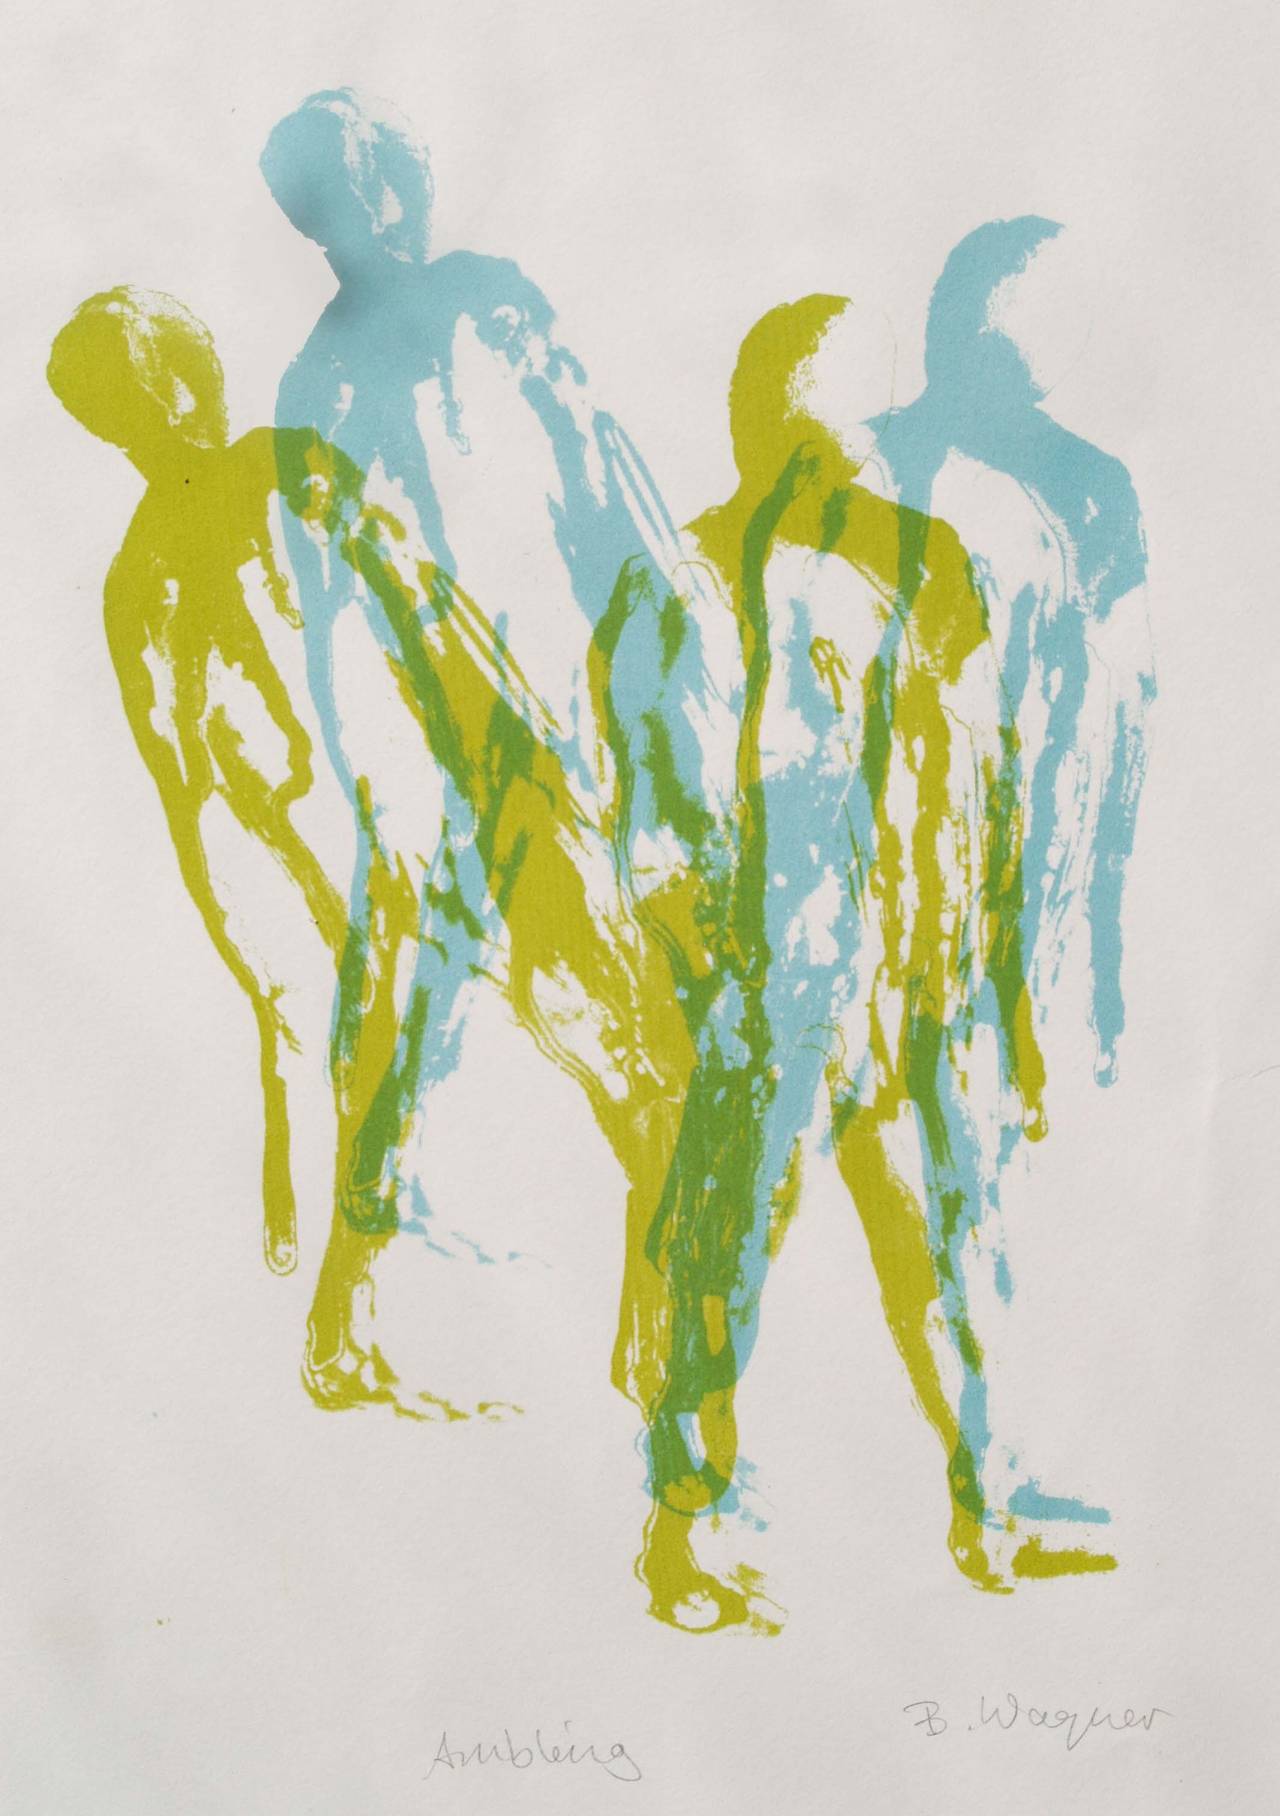 Barbara Wagner's love of figurative representation is what makes this silkscreen print so typical of her work. A super print showing the movement of people around their environment. This print is a "one off" and not part of an edition.

Sheet size